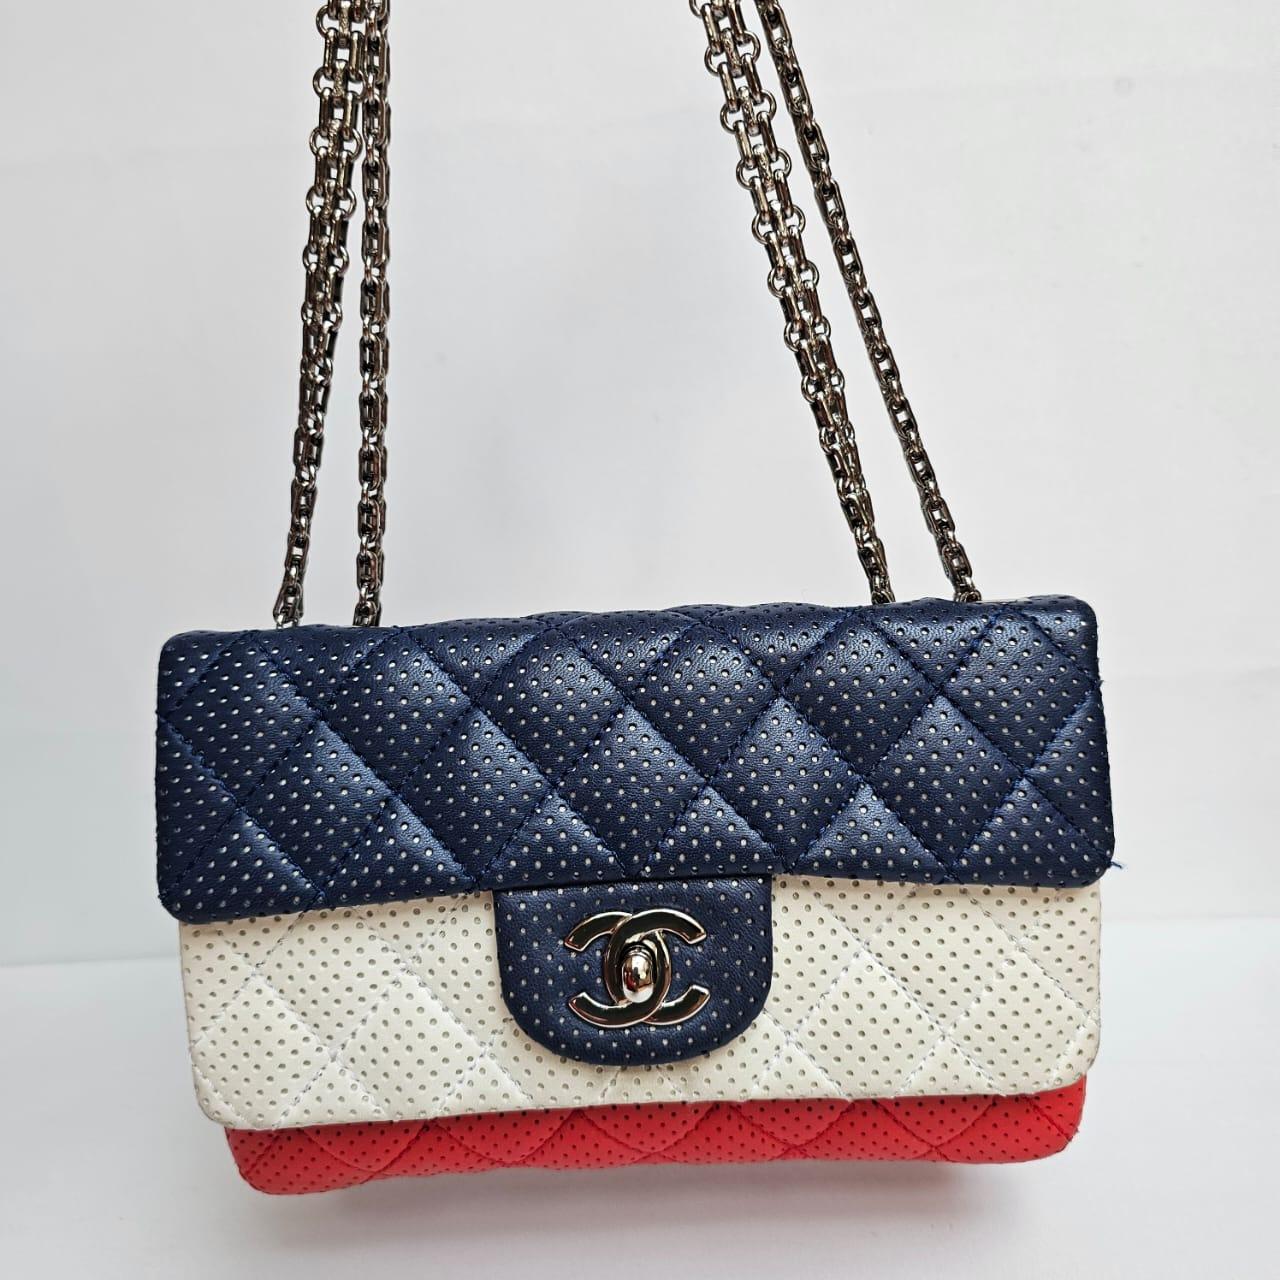 Chanel Tricolor Perforated Mini Rectangle Flap Bag For Sale 1